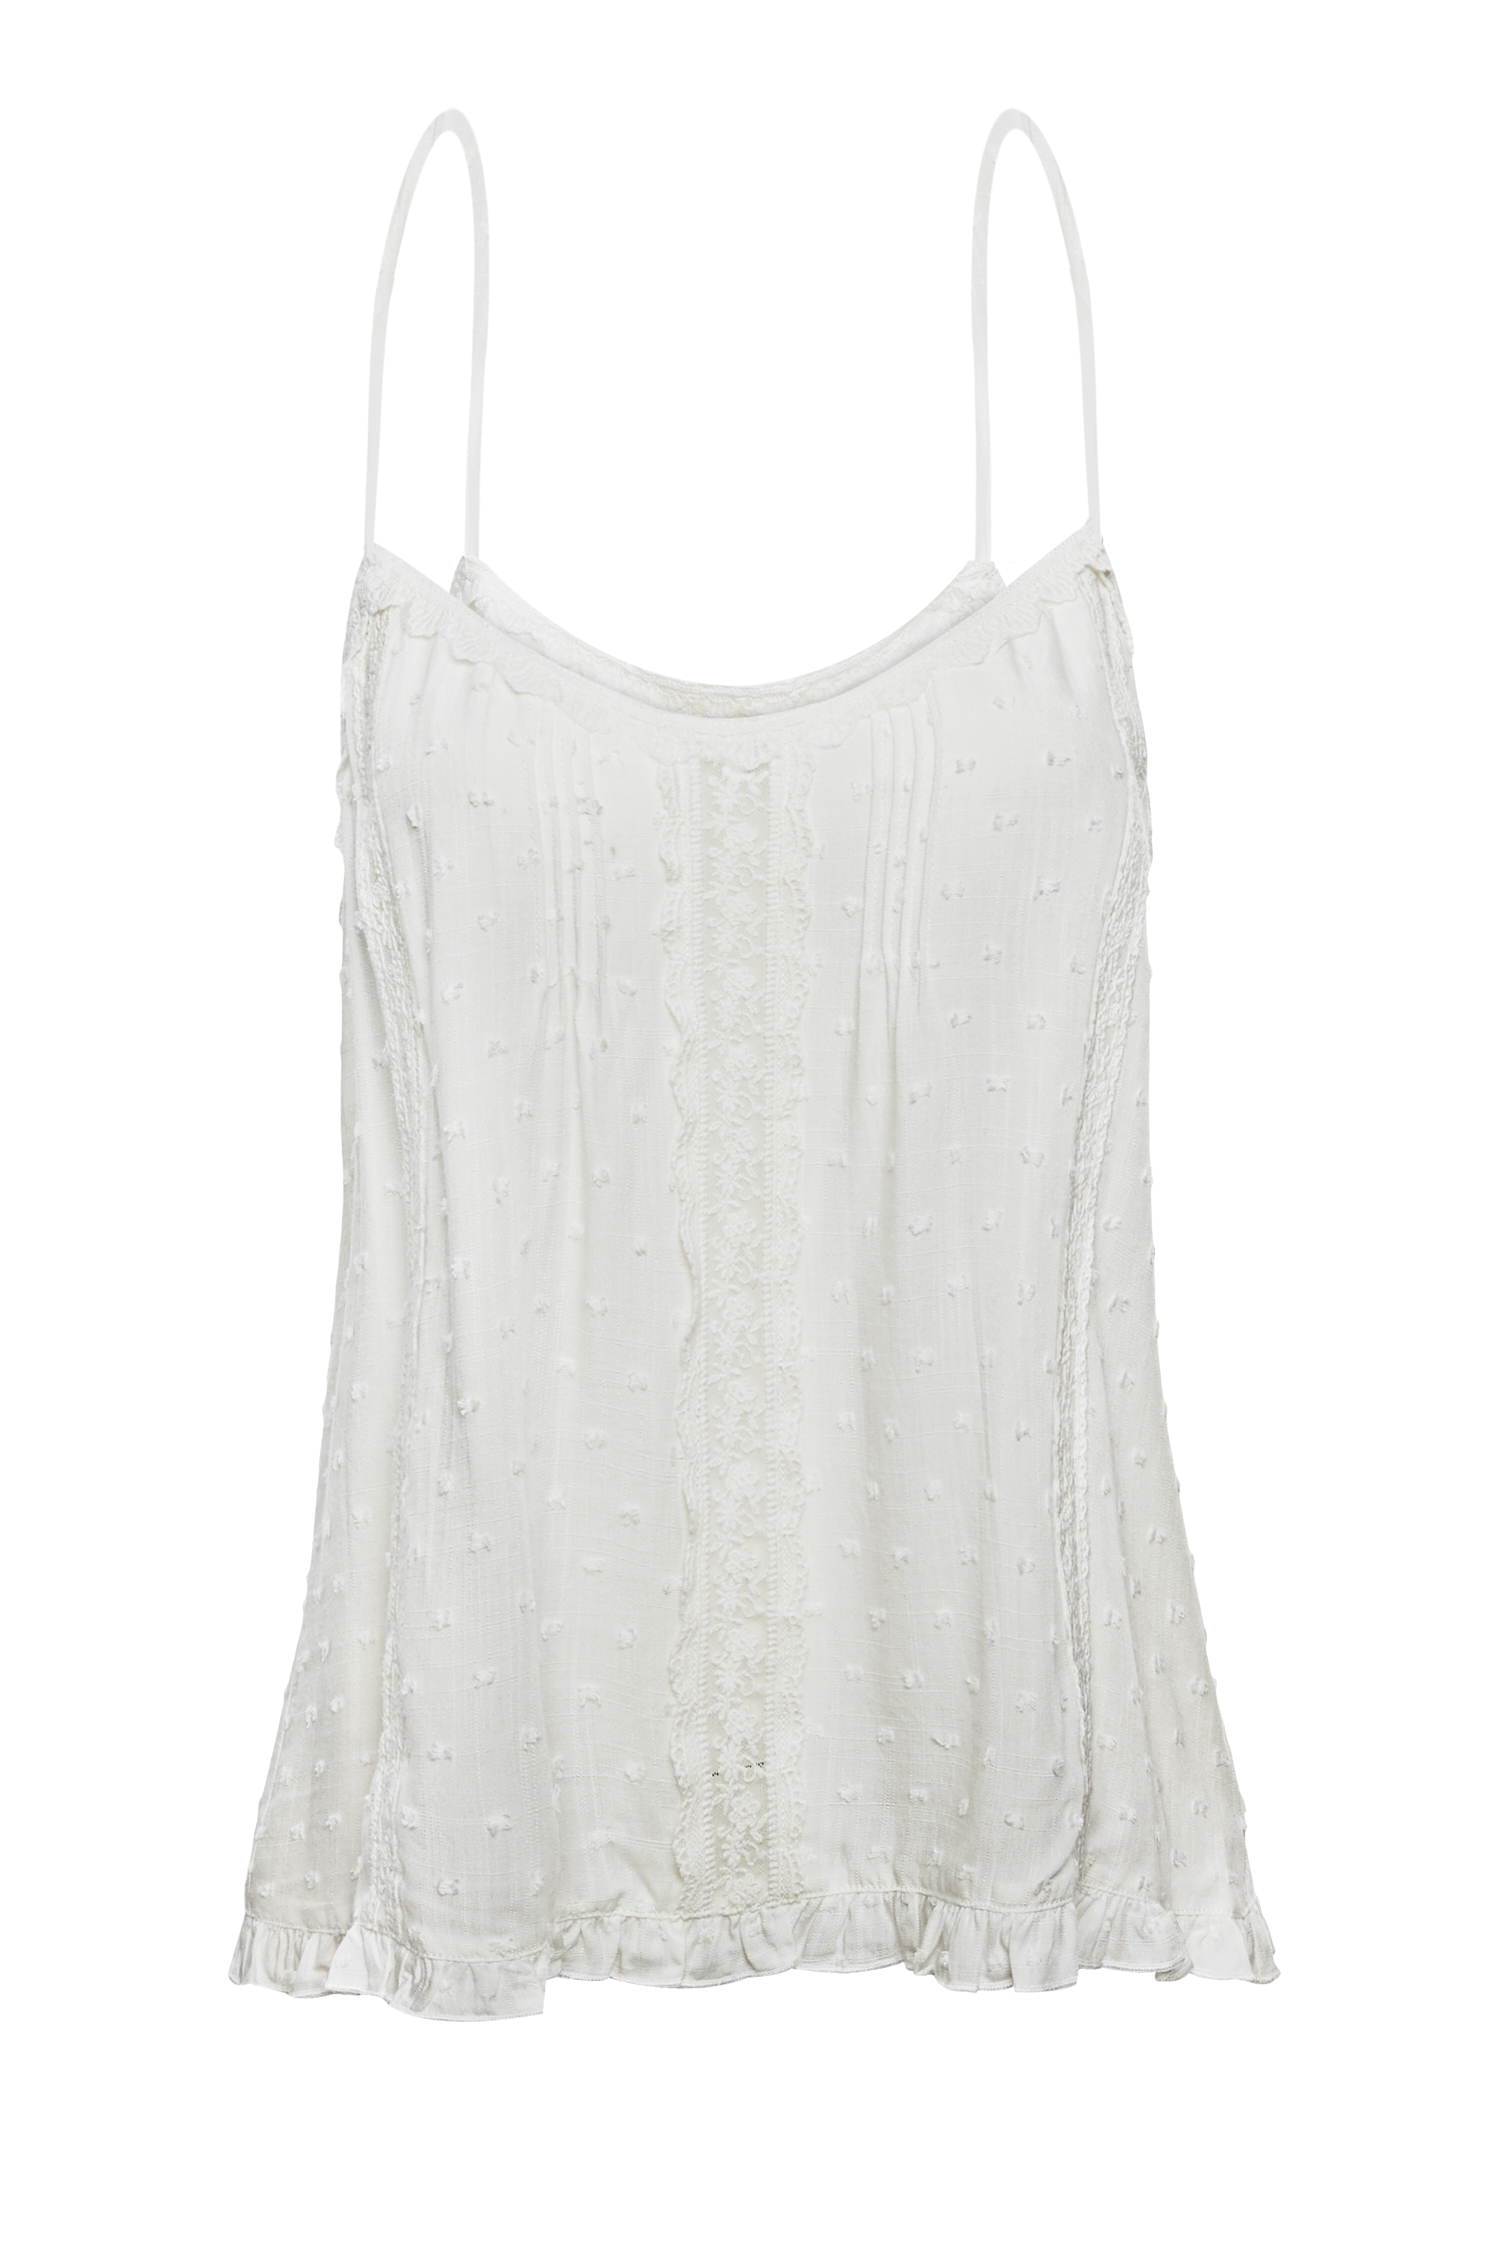 Swiss Dot Cami With Lace Trim Detail in White S - XL | DAILYLOOK